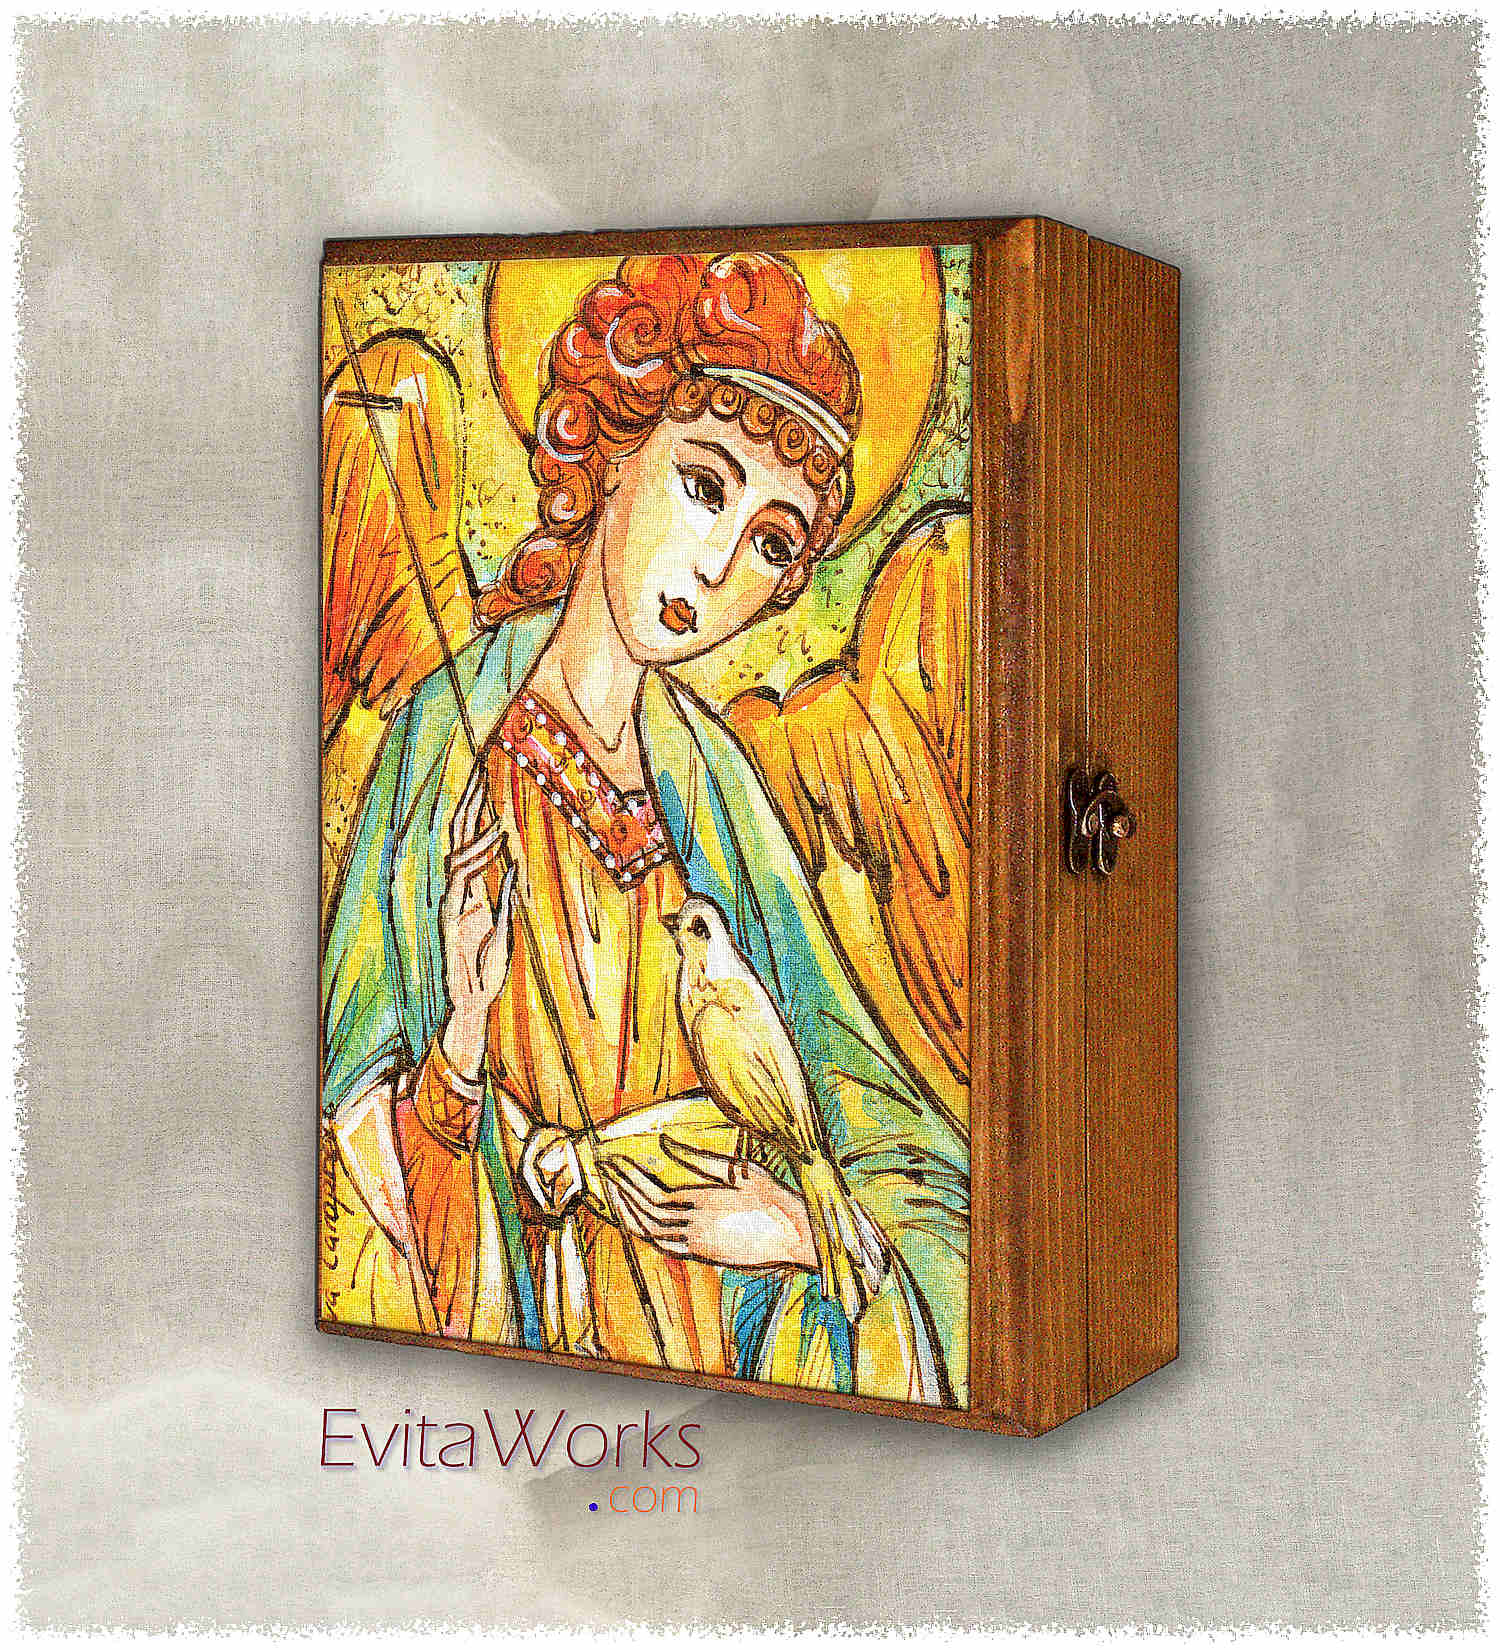 Hit to learn about "Angel 33, Christian art" on jewelboxes